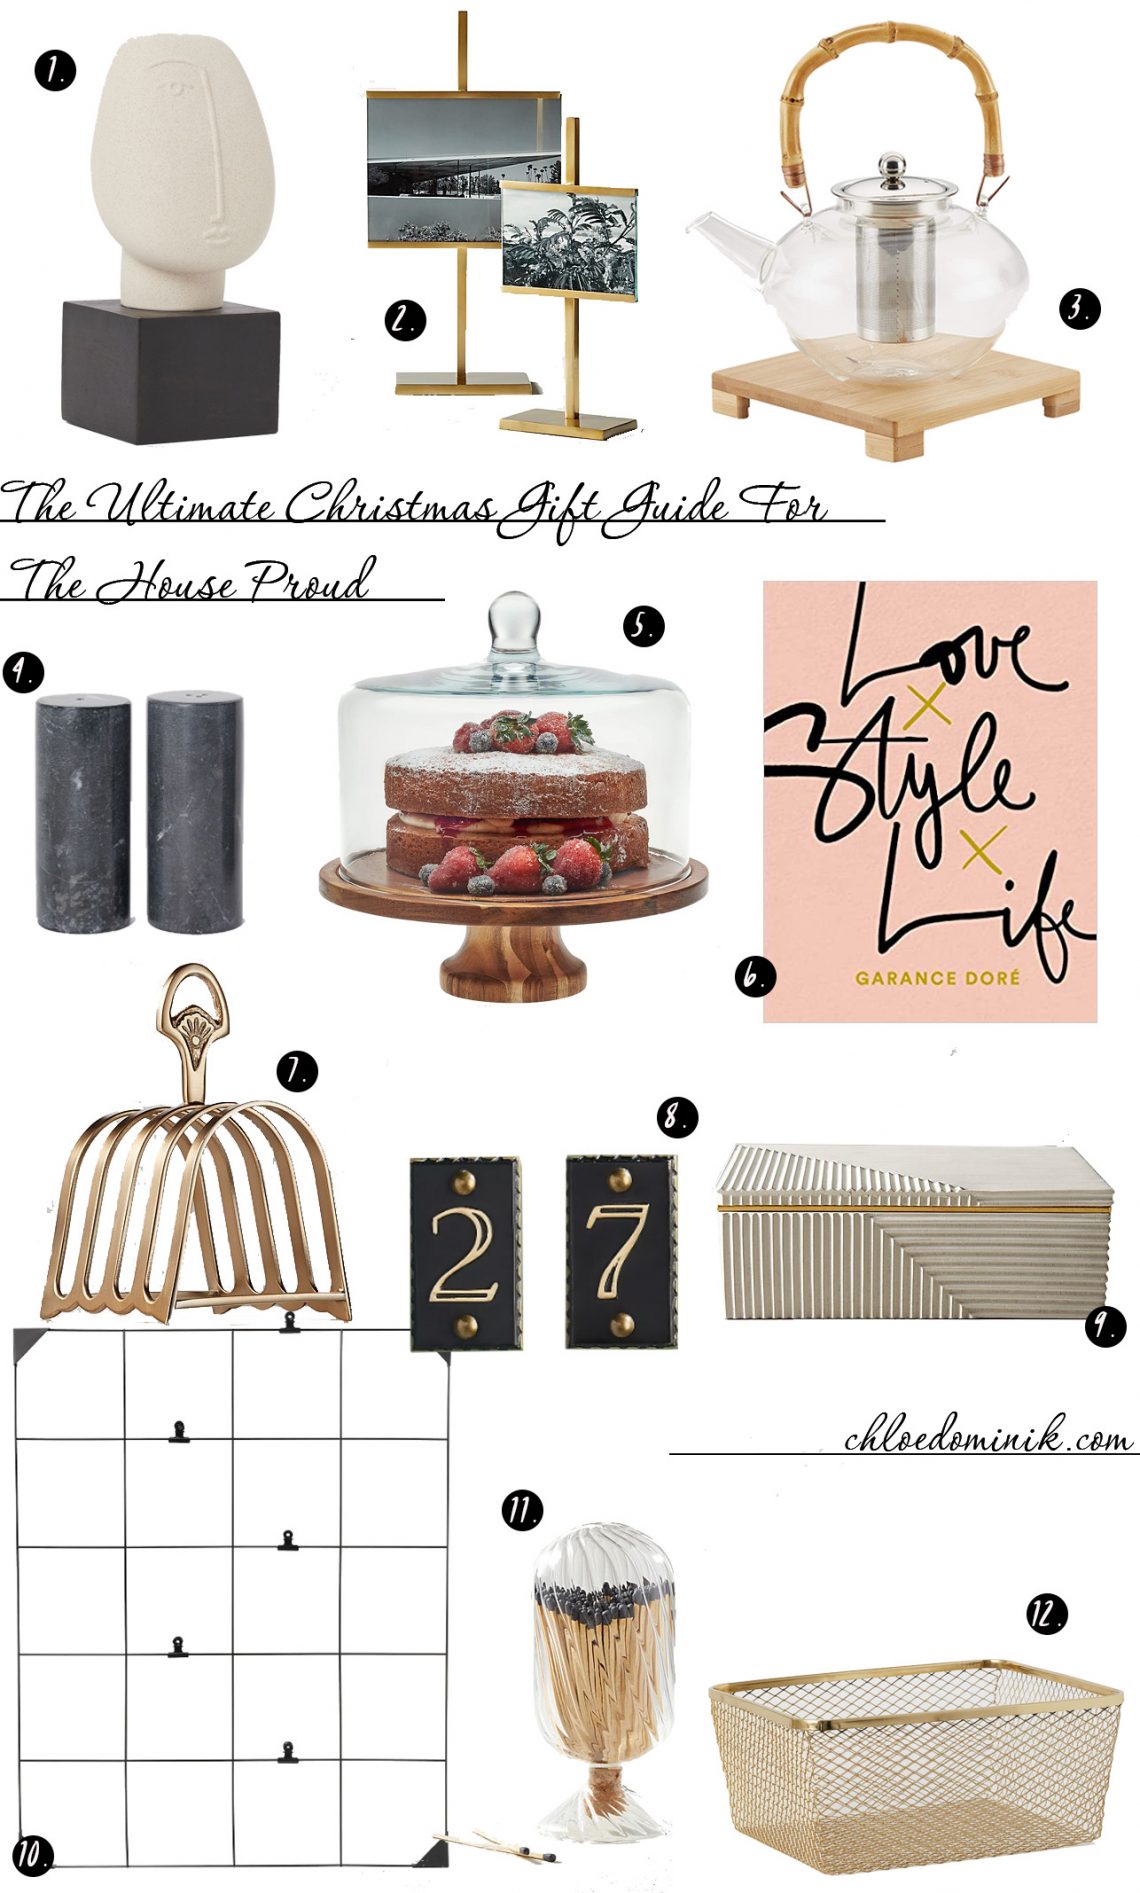 The Ultimate Christmas Gift Guide For The House Proud: It's always nice to put some effort into our homes to make it stylish and welcoming for ourselves and others! Here is the ultimate gift guide for Christmas ideas and presents for those who like to go all out with home decor and styling with some gorgeous pieces for home decor to keep organized and on trend! @chloedominik #houseproudhome #christmasgiftguides #christmasgiftideas #homedecorgifts #homedecorgiftguide #homedecorpresents